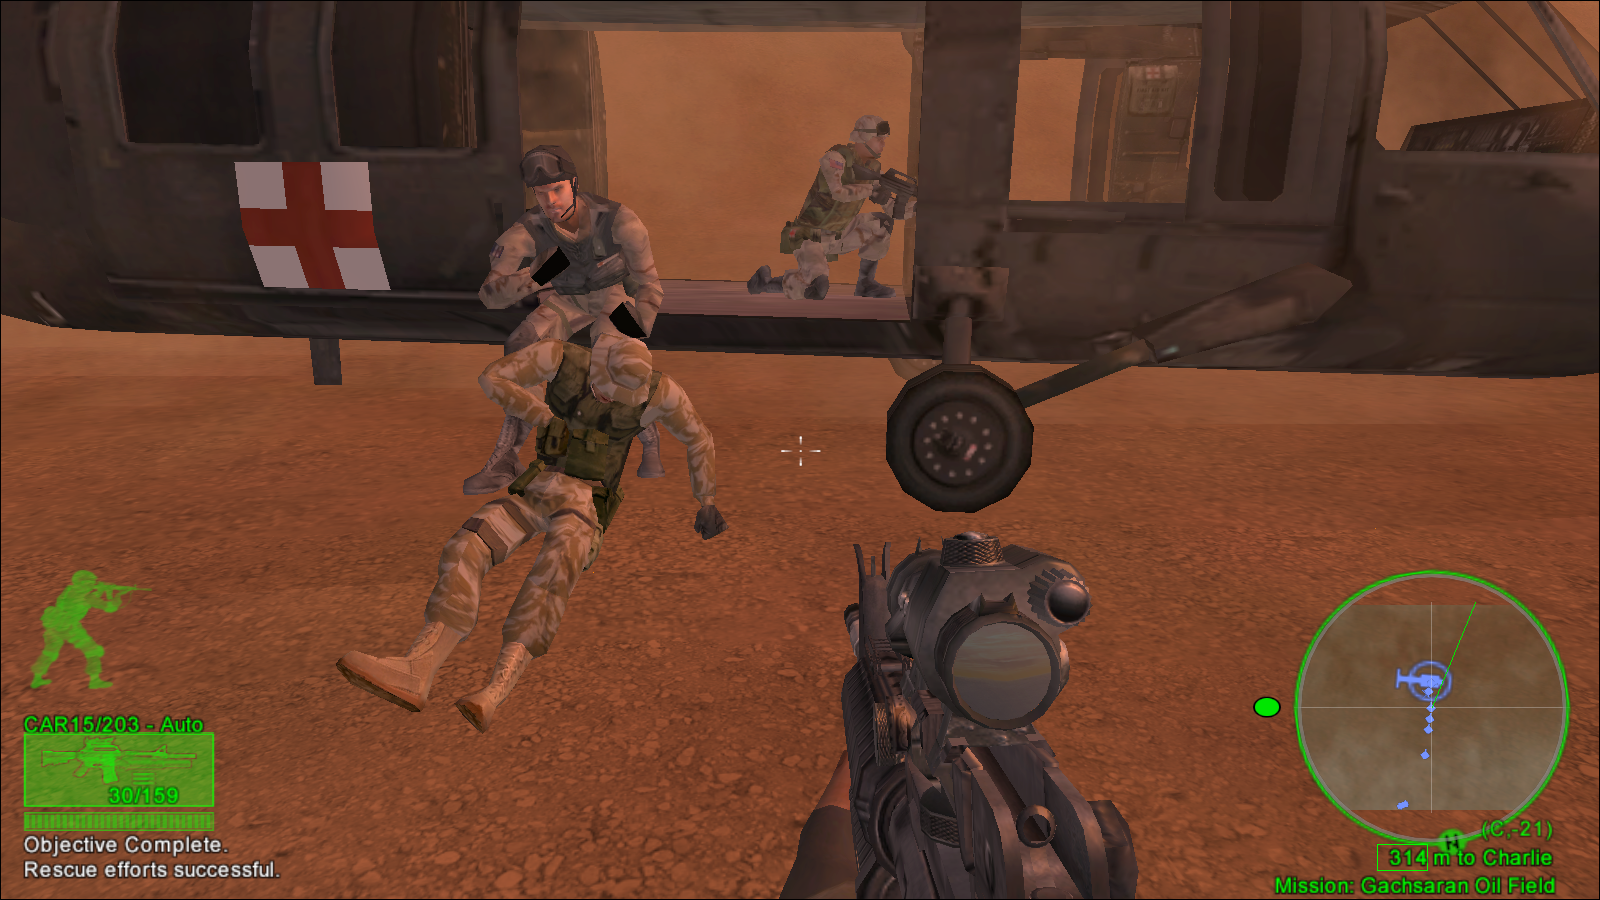 Delta Force: Black Hawk Down - Team Sabre Screenshots, Images And Pictures  - Giant Bomb